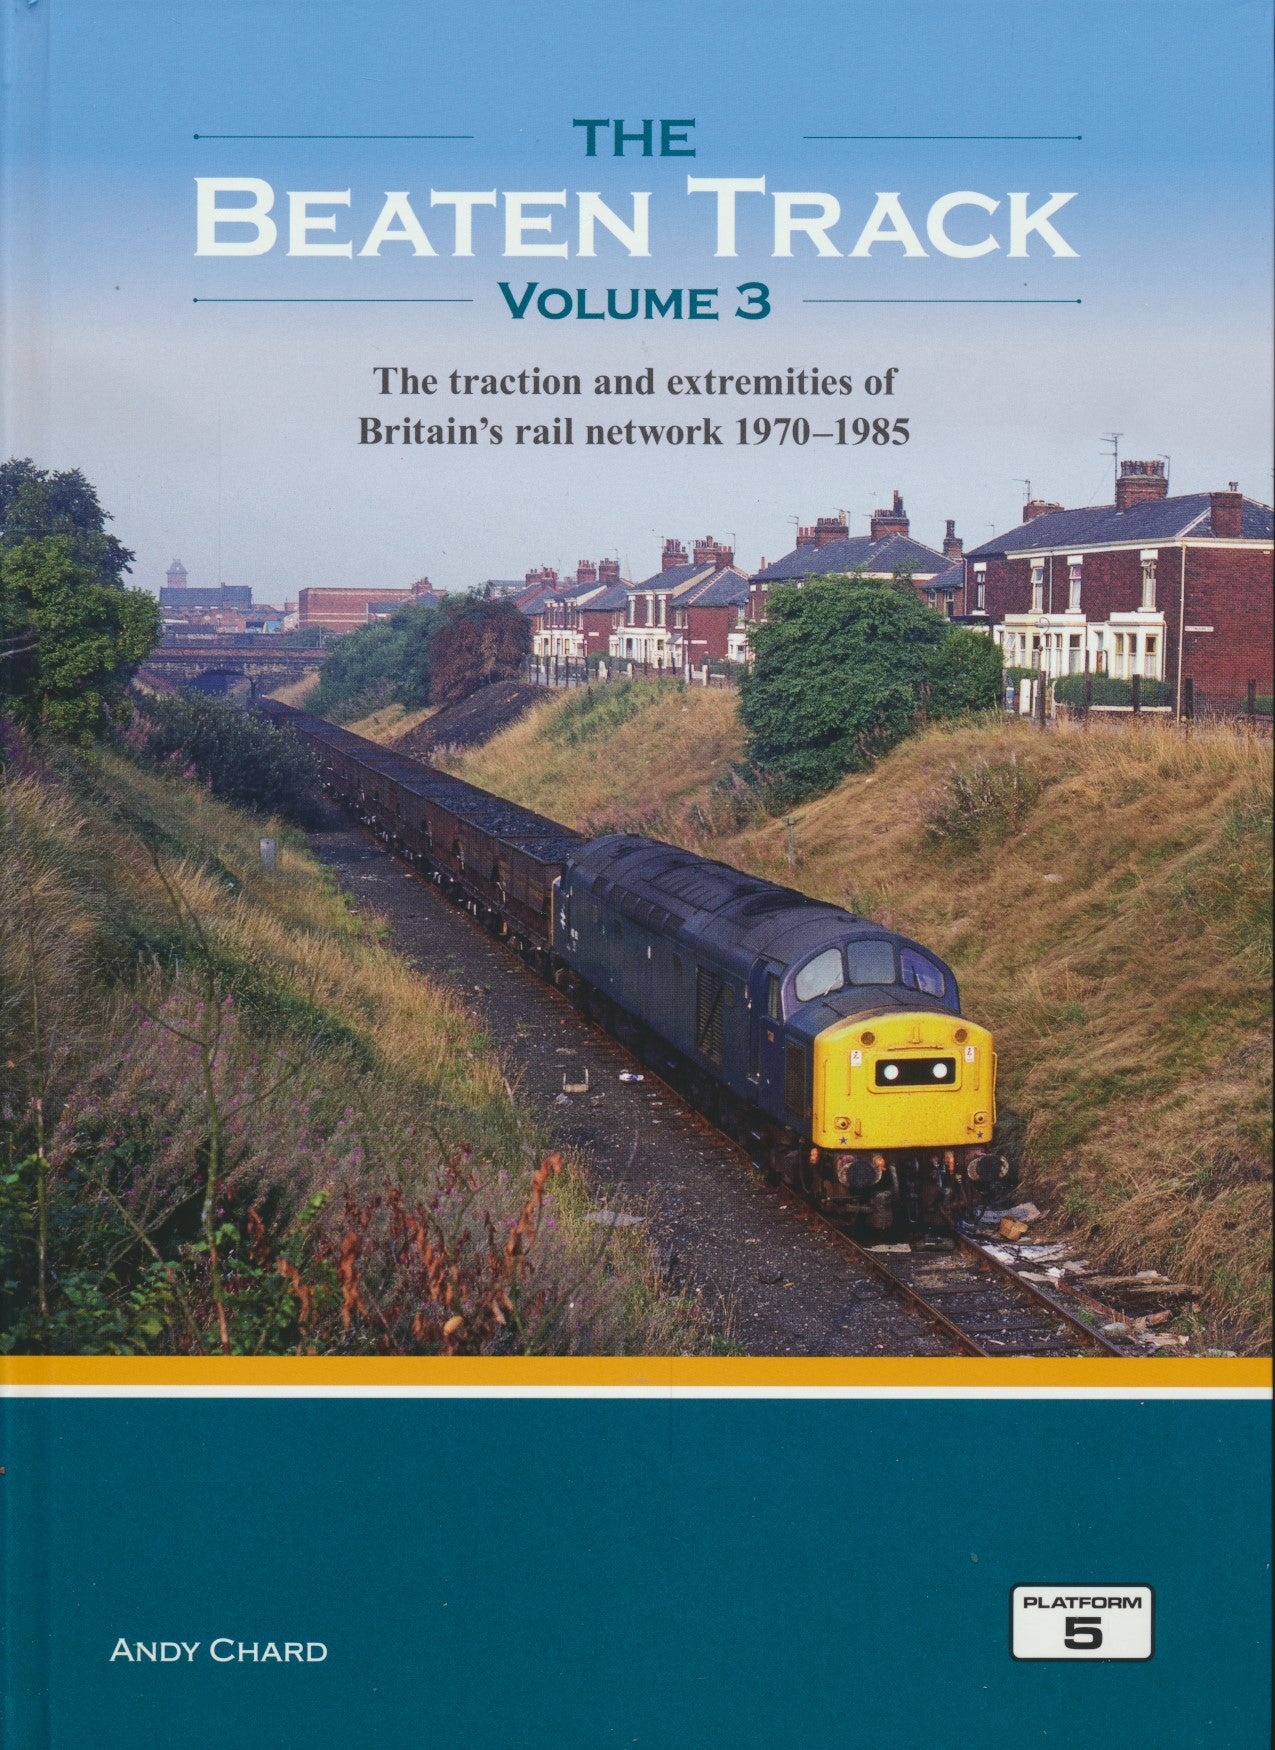 The Beaten Track Volume 3: The Traction and Extremities of Britain's Rail Network 1970-1985